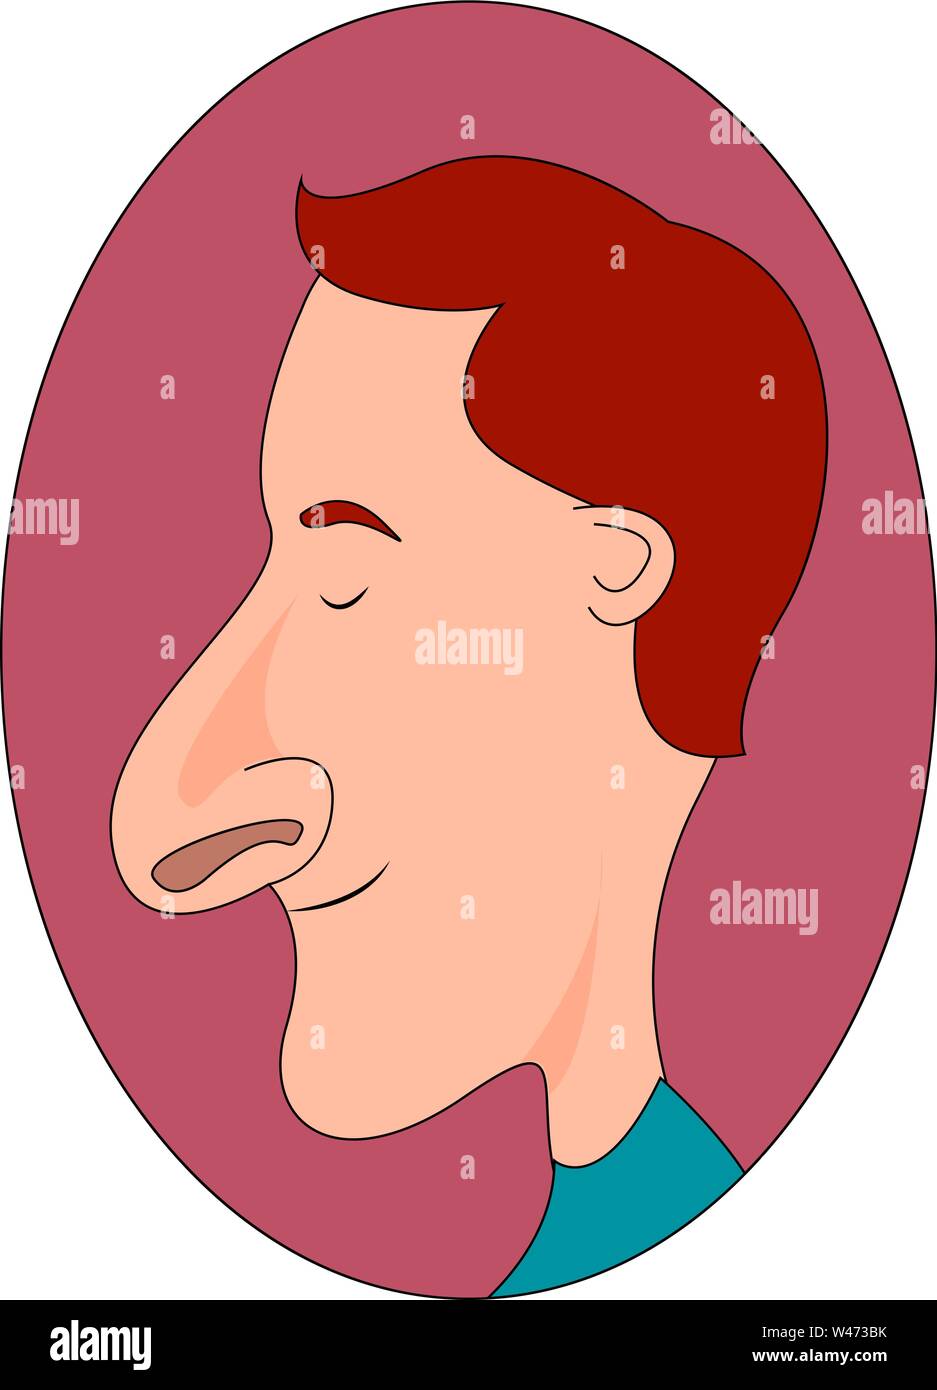 Big nose Cut Out Stock Images & Pictures - Alamy